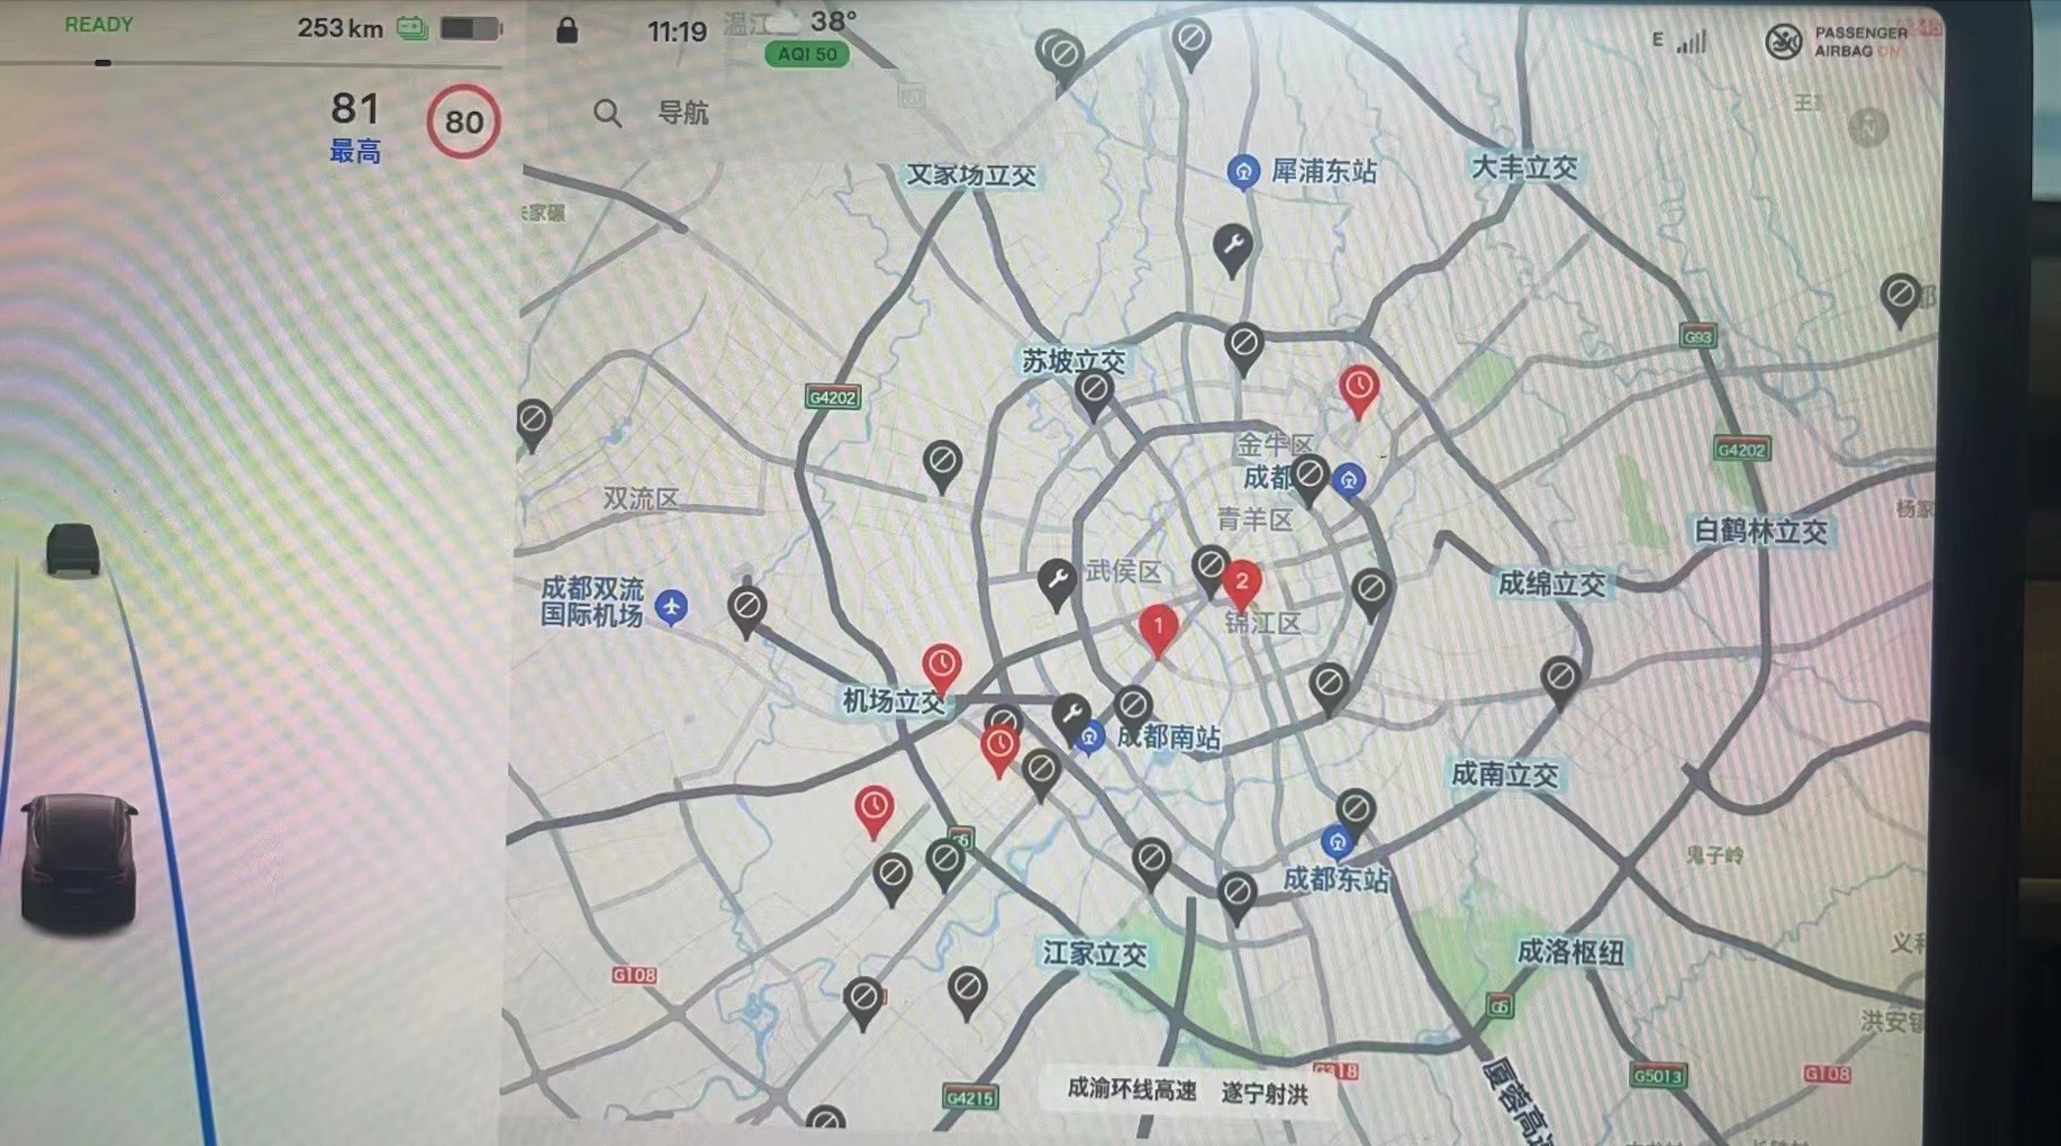 A screenshot of a Tesla car showing just two of the 31 nearby Tesla Supercharger stations is available.